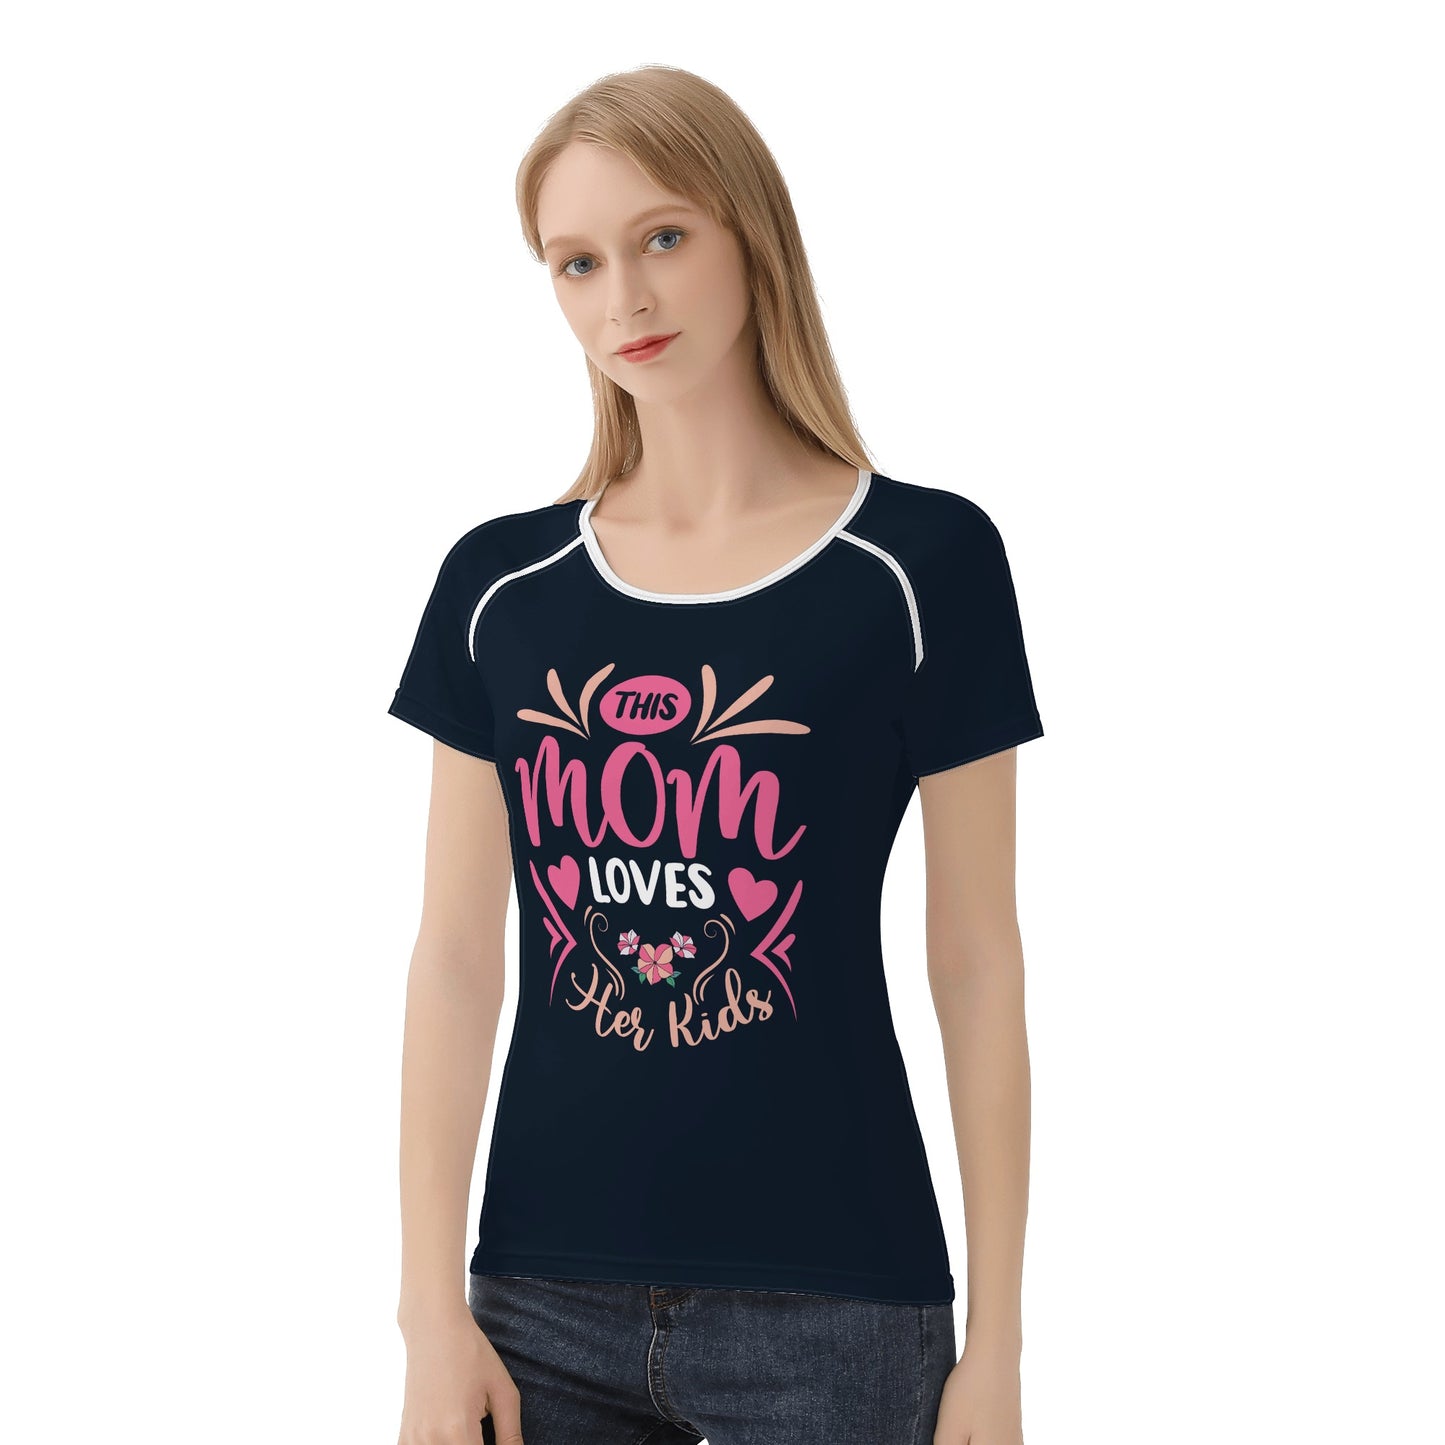 Show Mom The Love This Year with a Womens All-Over Print T shirt